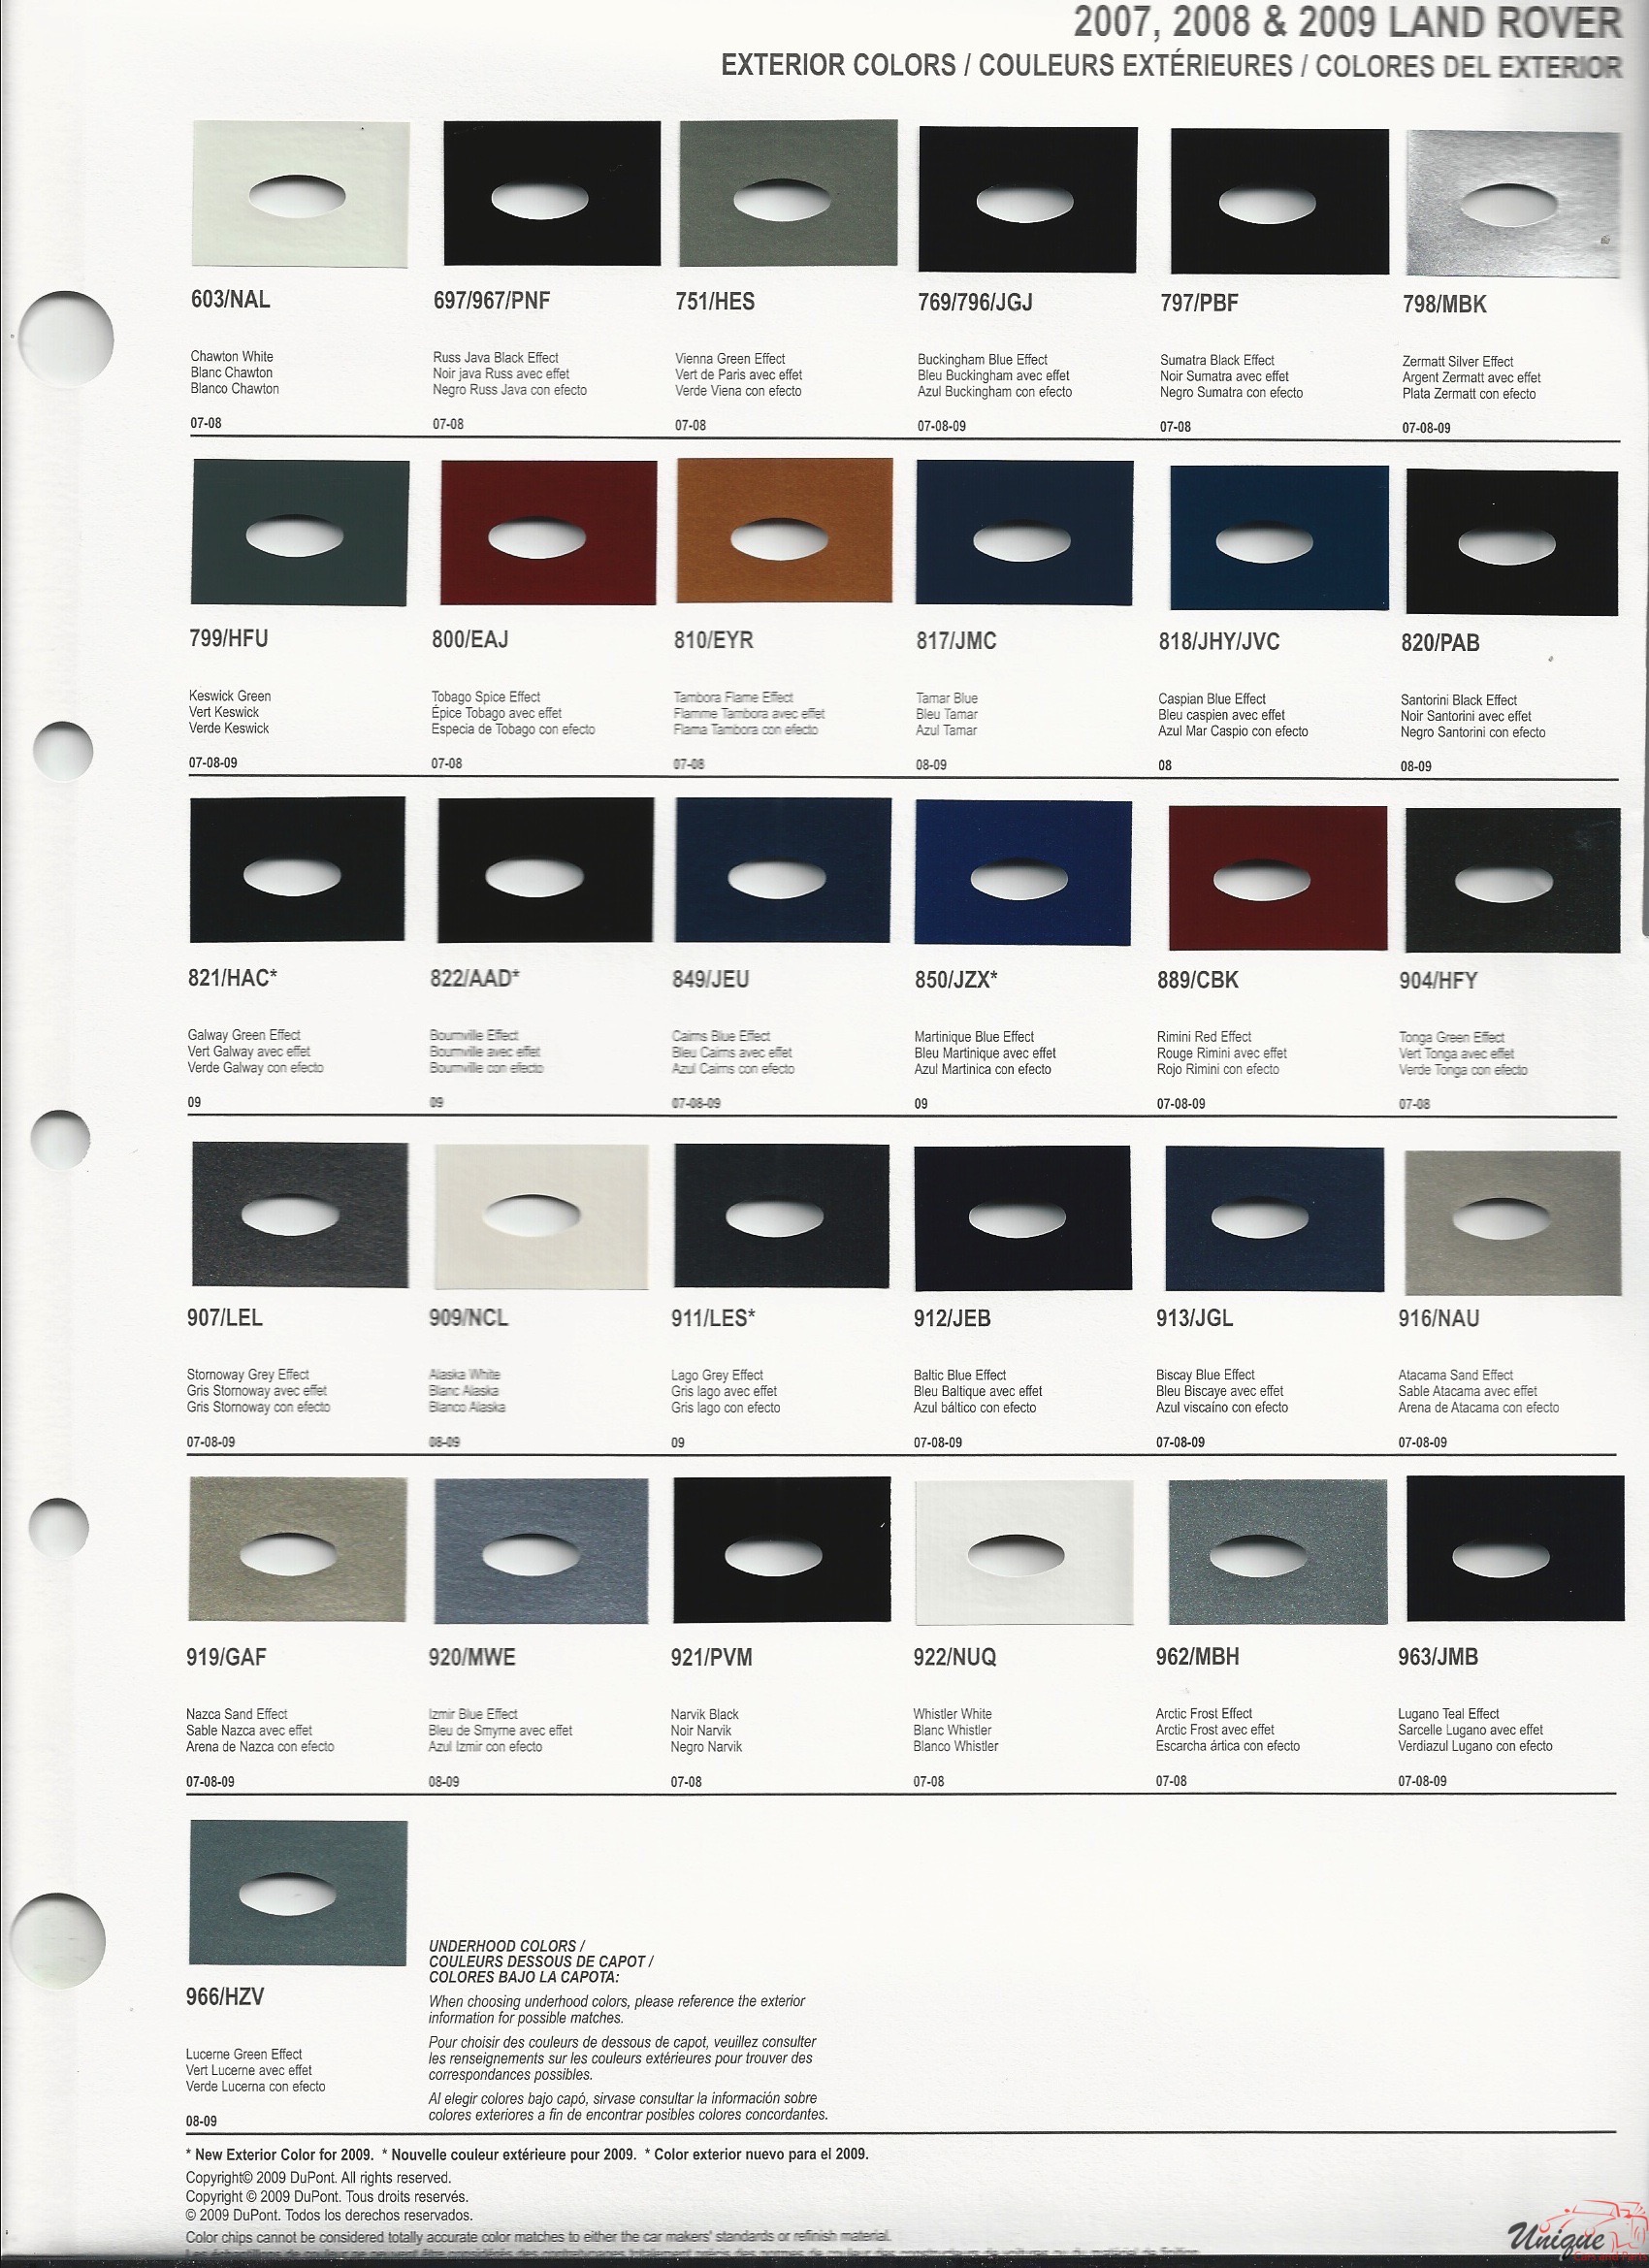 2007 Land Rover Paint Charts